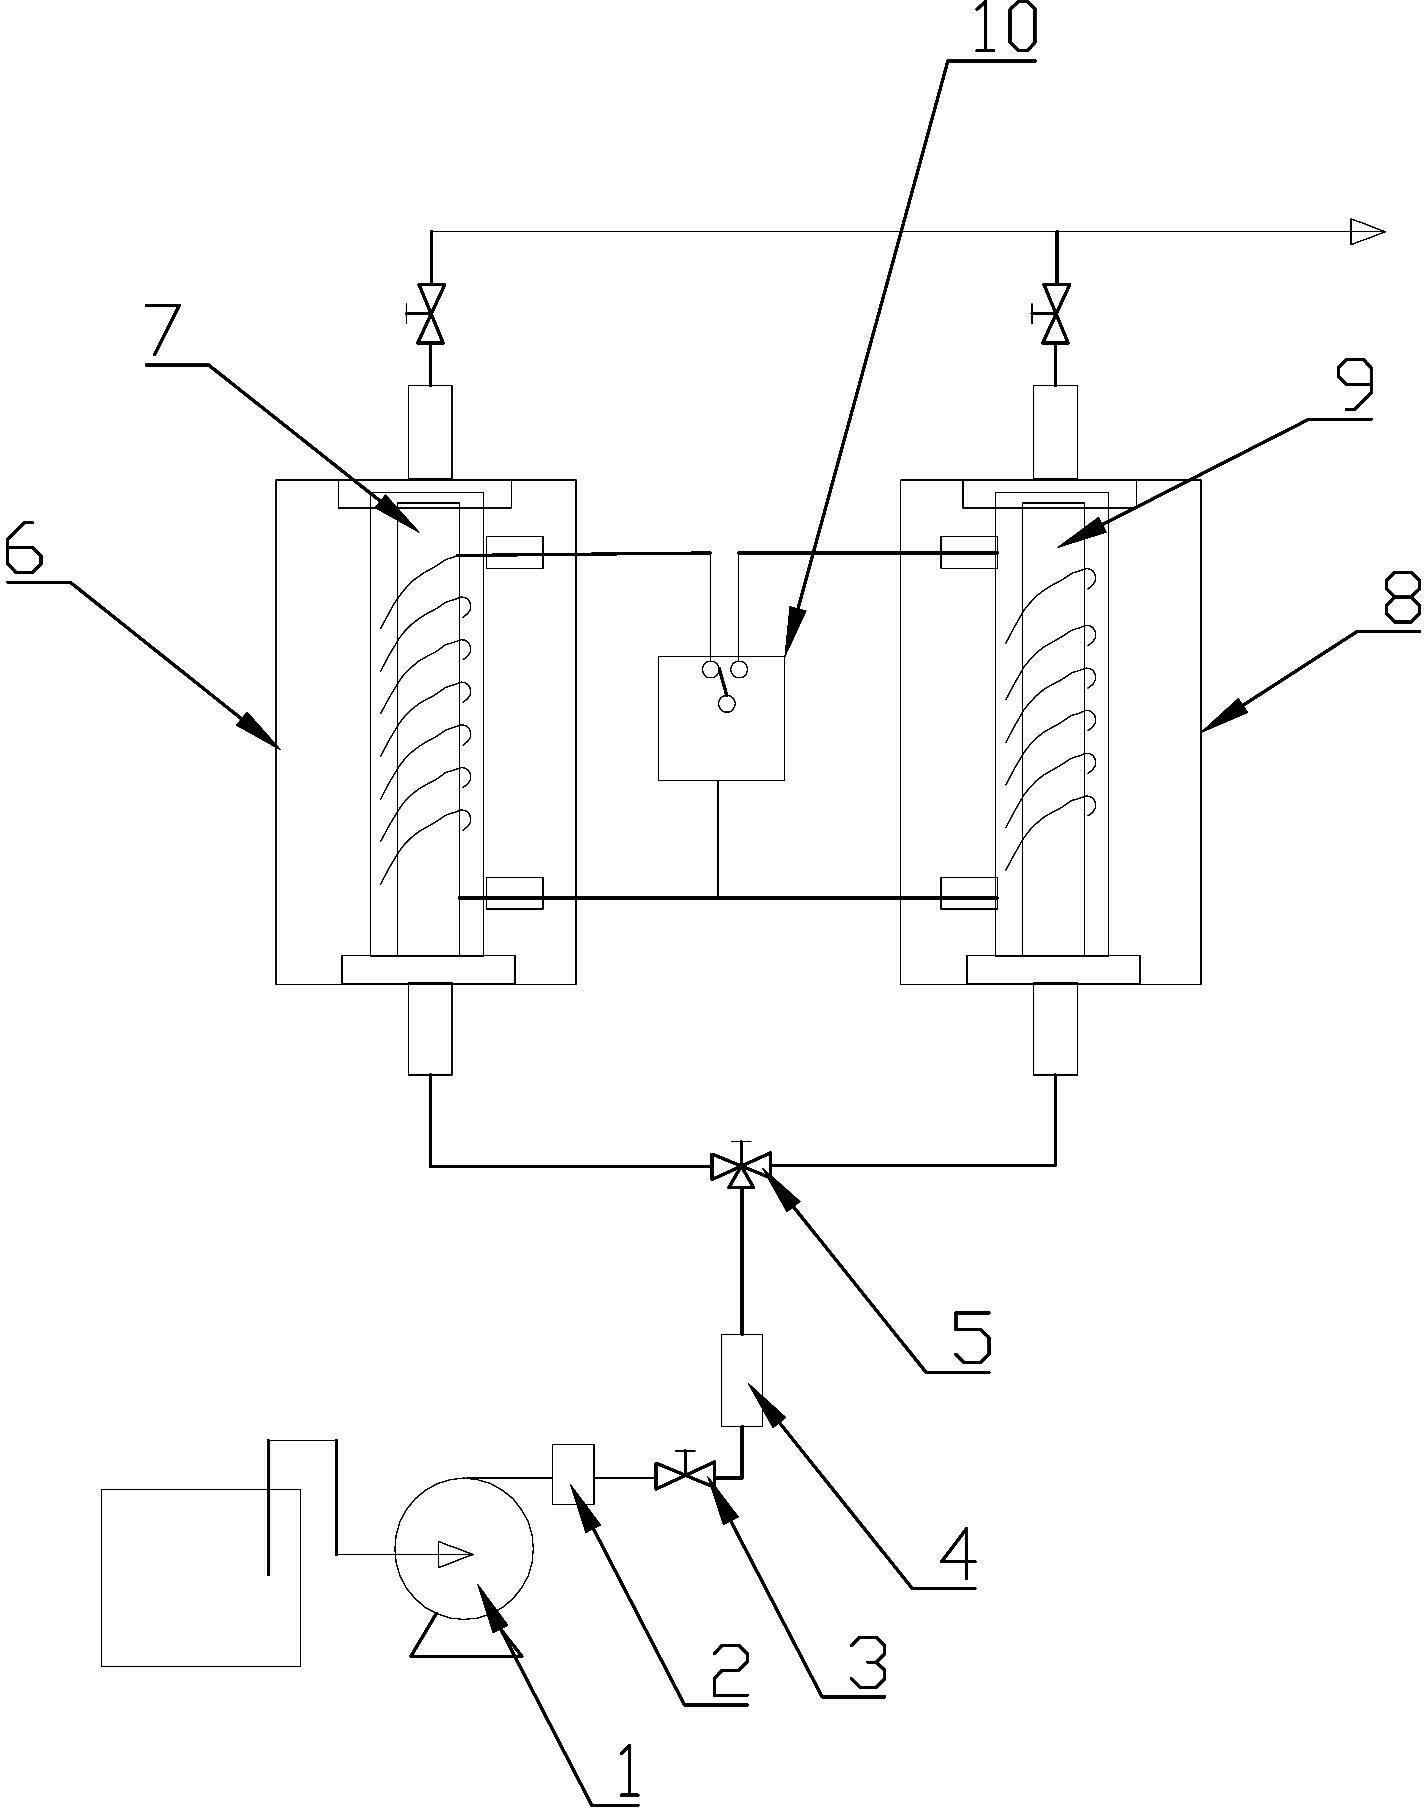 Removal method for organic pollutants based on microporous mineral absorption and coupling as well as microwave degradation